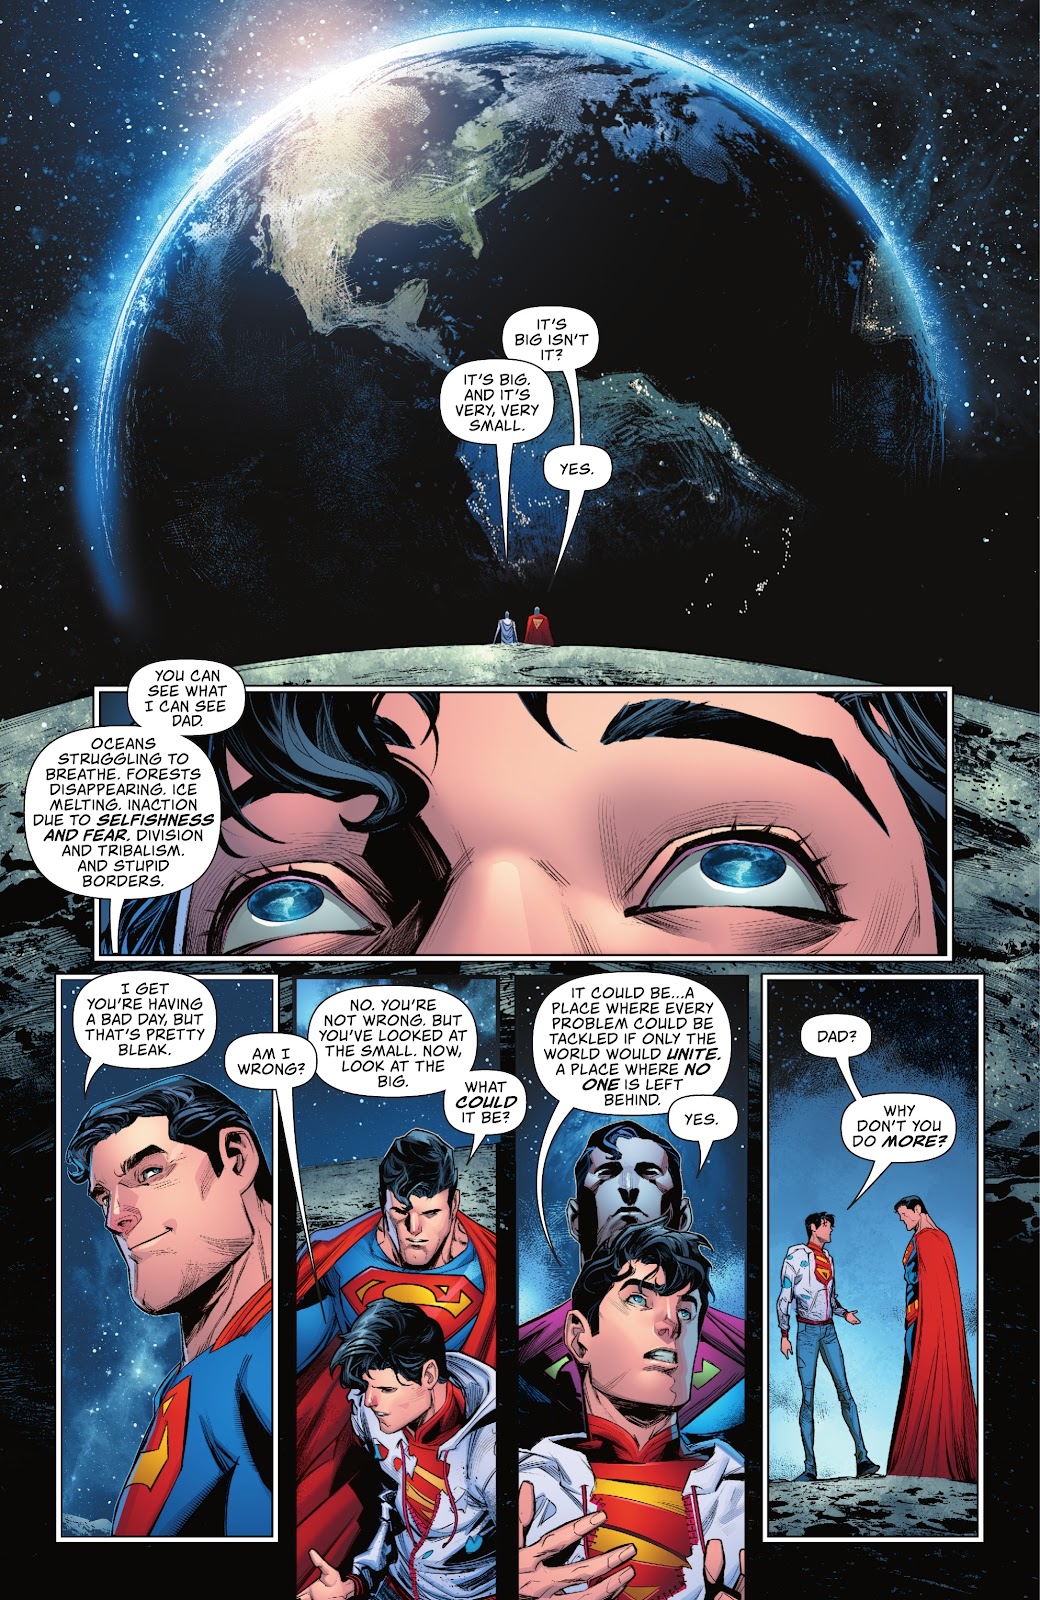 Why Superman Did Not Do More For The World